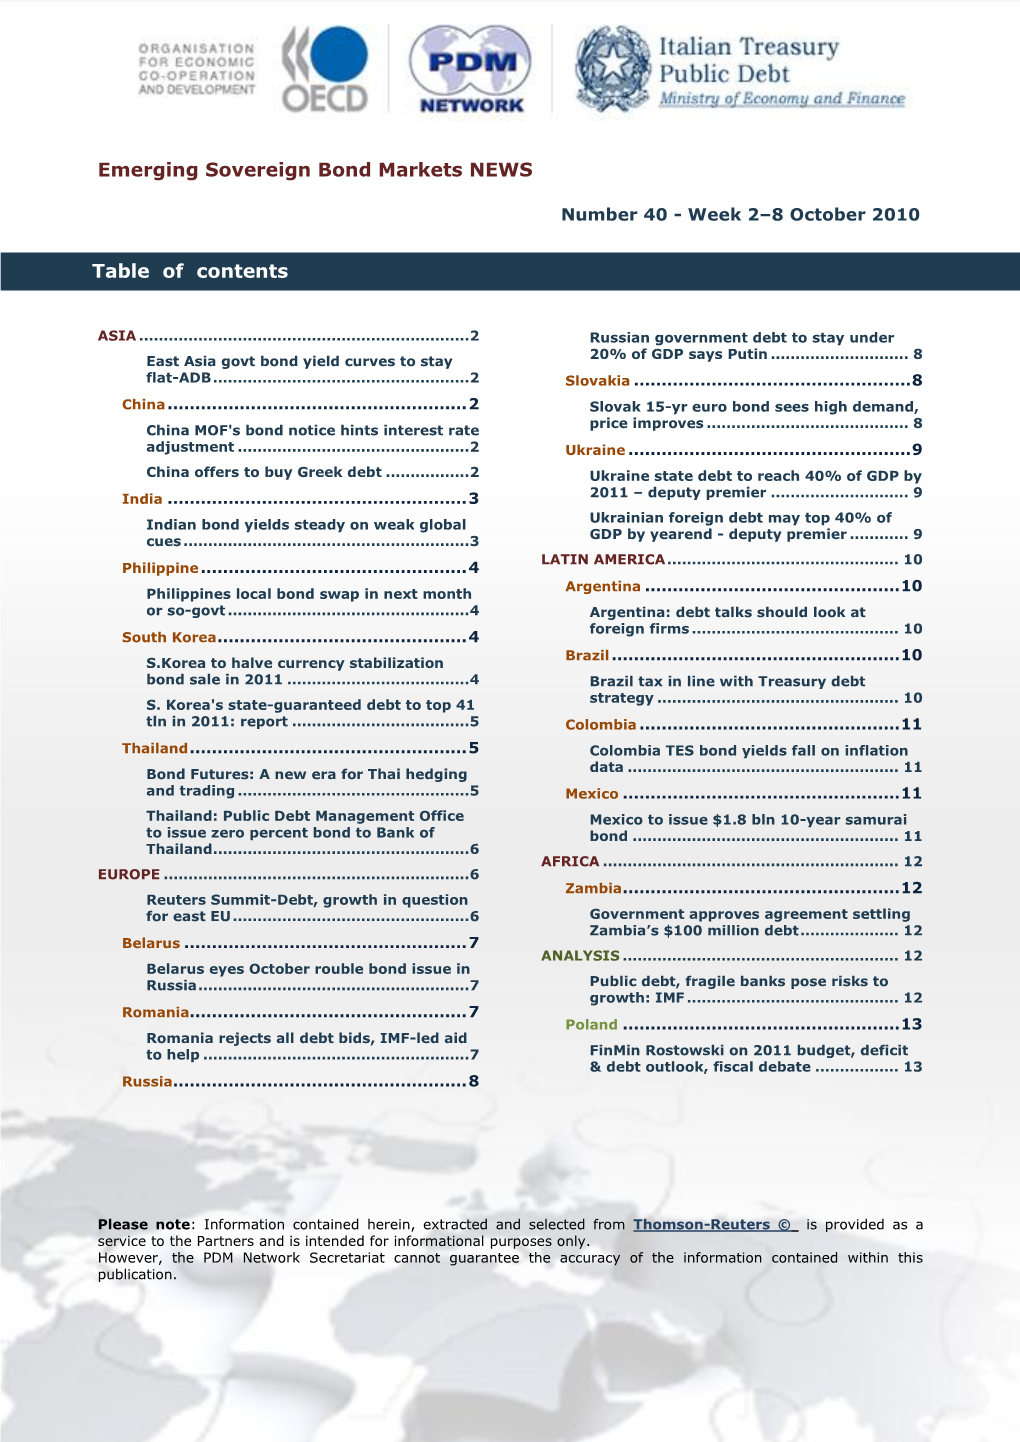 Emerging Sovereign Bond Markets NEWS Table of Contents